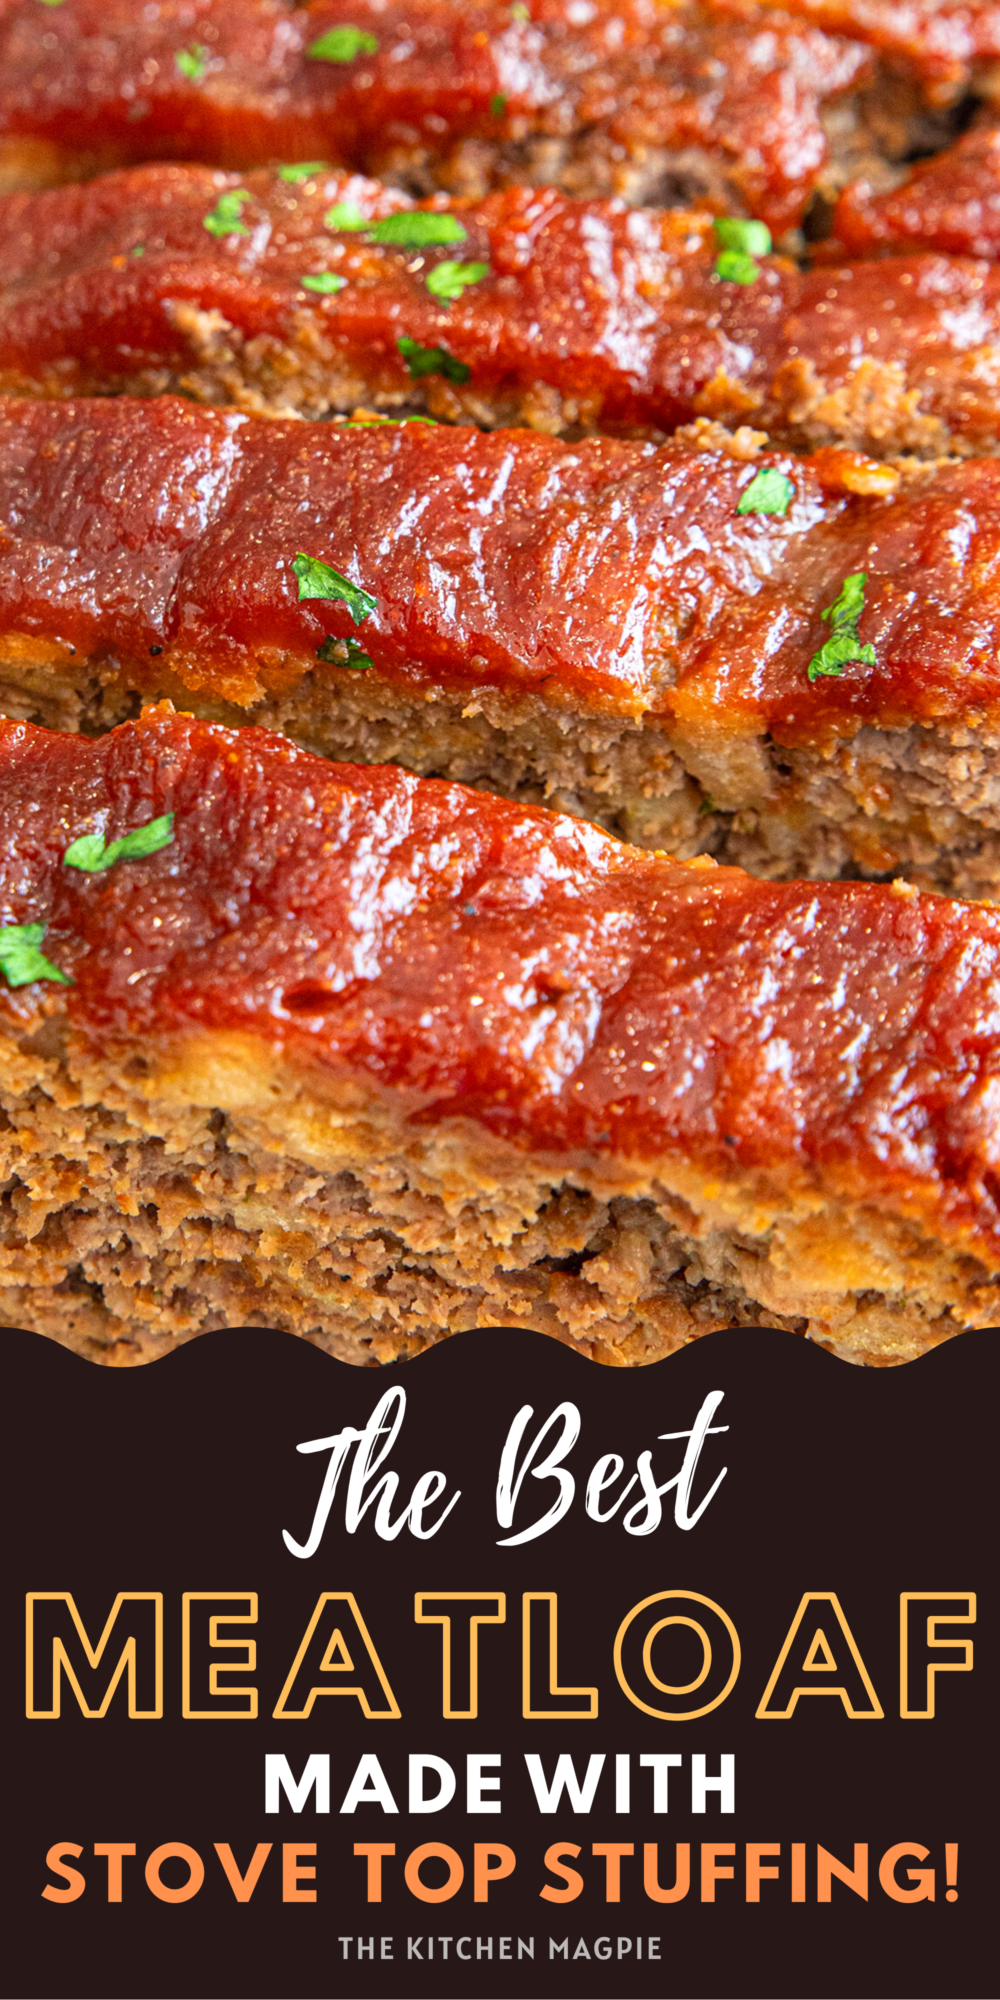 This fantastic meatloaf sauce takes only a few minutes to make, has simple ingredients, and will transform your meatloaf into a new family favorite!
